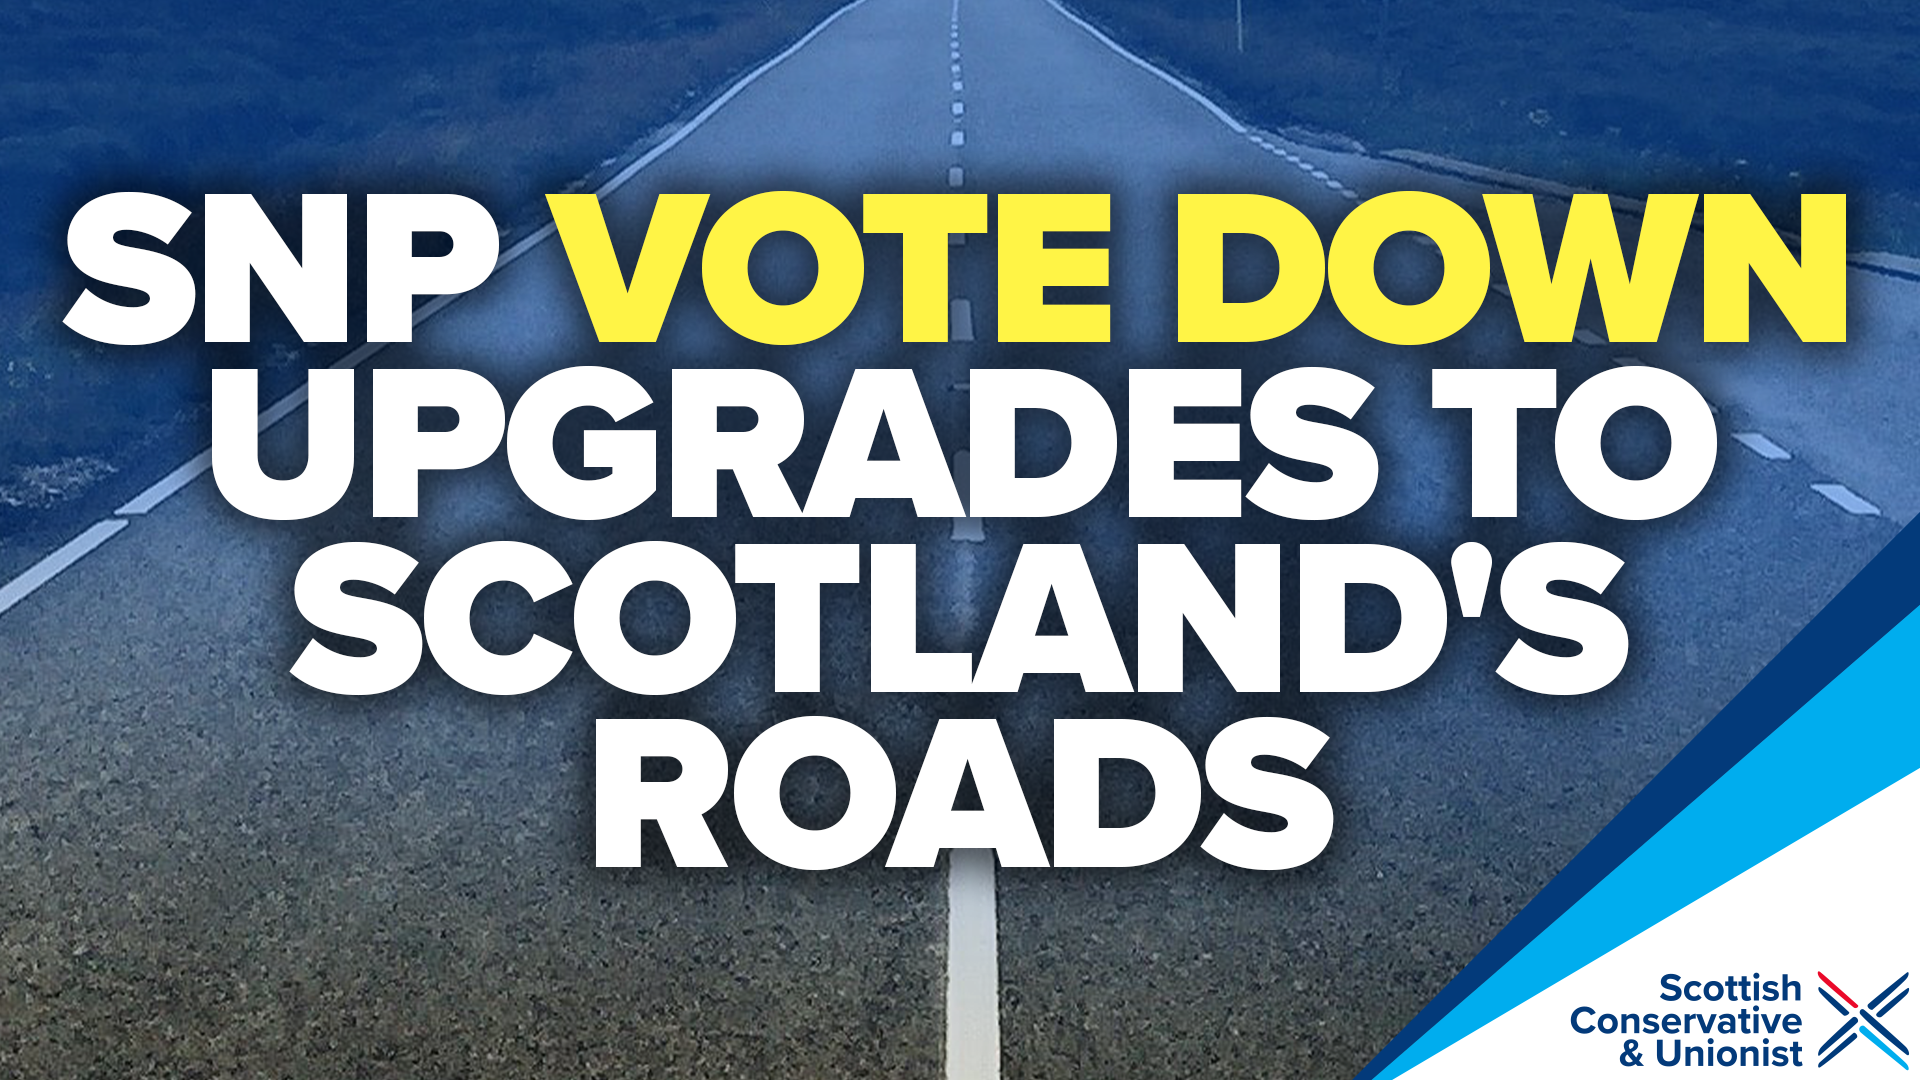 AGAINST.ROAD 101 Failures of the SNP in Government